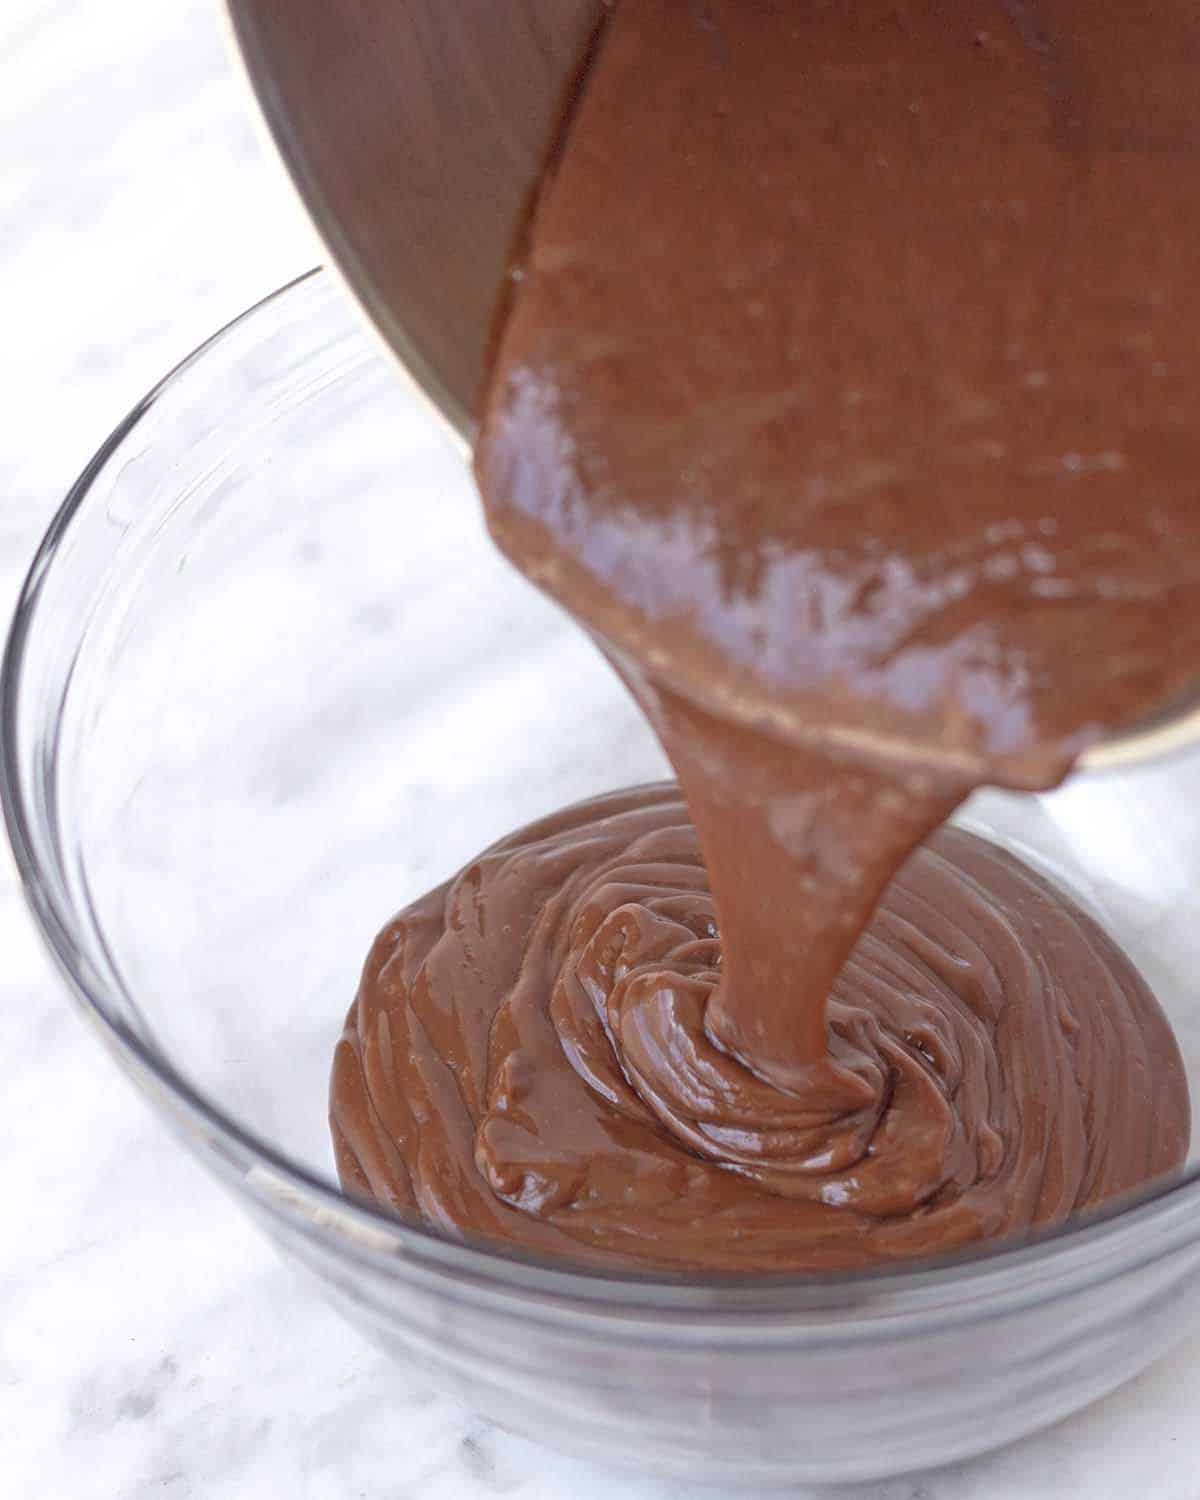 Homemade vegan gluten-free chocolate pudding being poured from a pot into a glass bowl.